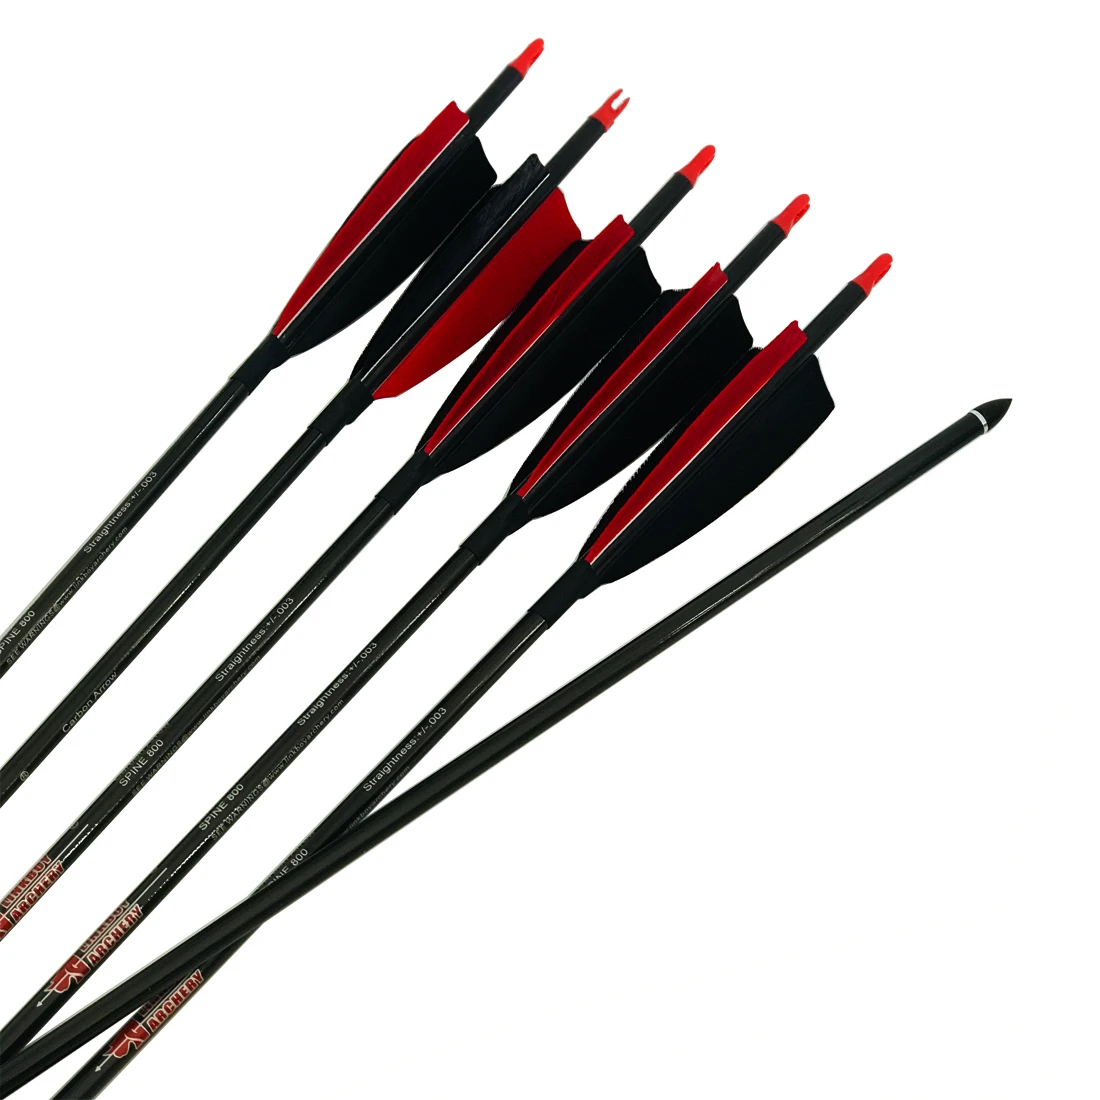 12pcs Archery Pure Carbon Arrow Spine 300 340 400 500 600 700 800 4inch Turkey Feather 75gr Tips Compound Bow Hunting